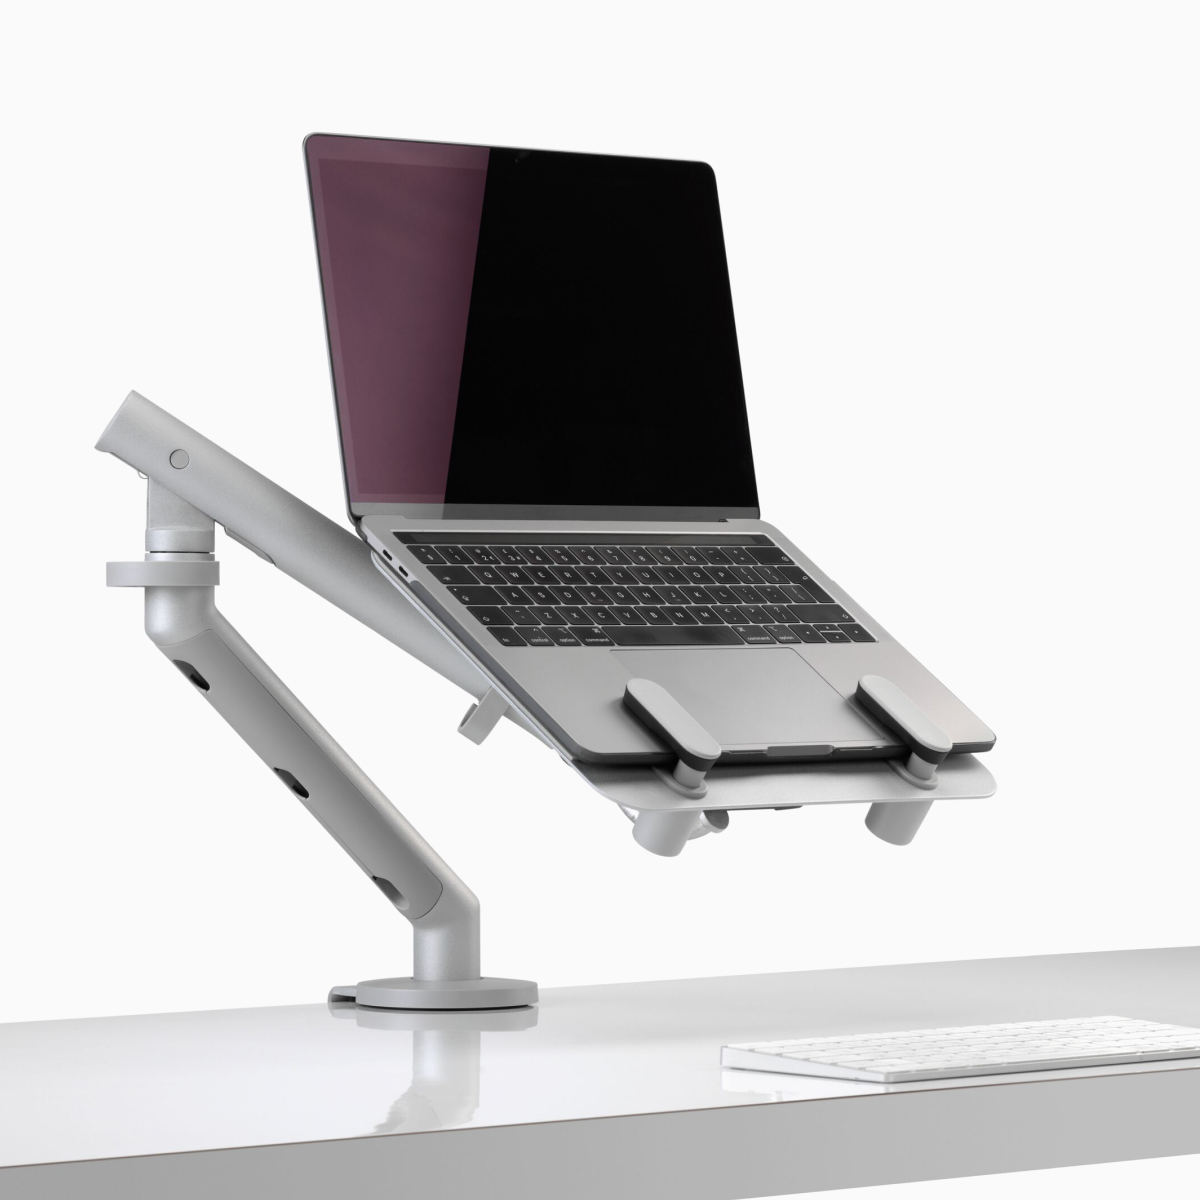 An open laptop raised to eye level and supported by an Ollin Laptop Mount and Flo Monitor Arm.